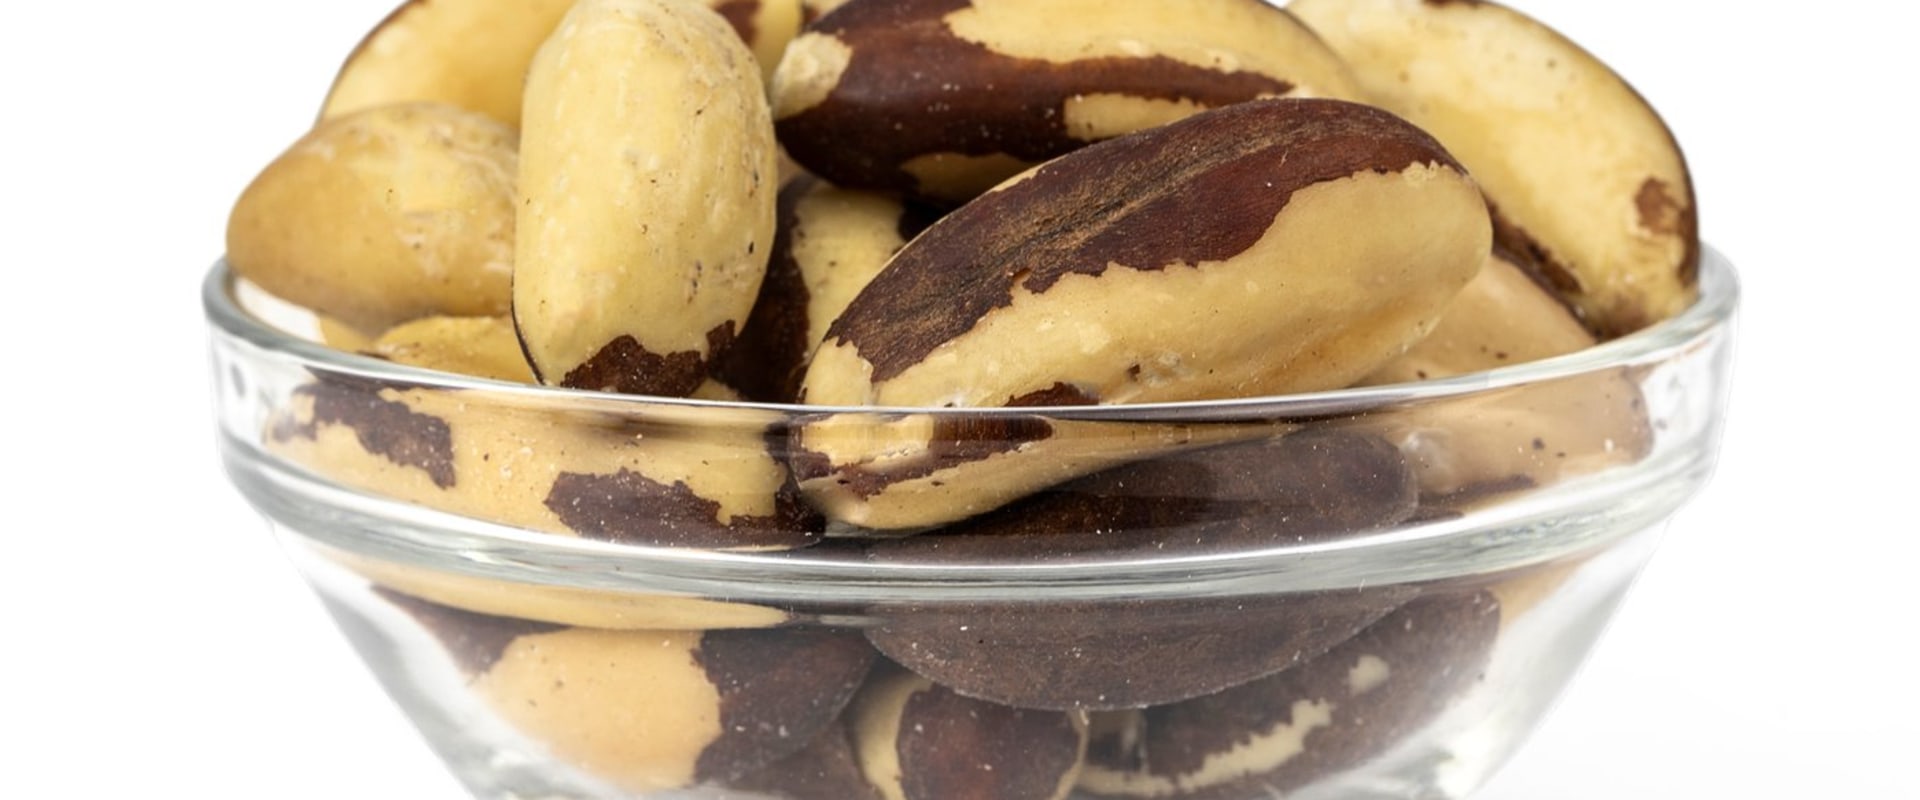 Can you buy brazil nuts without the shell?